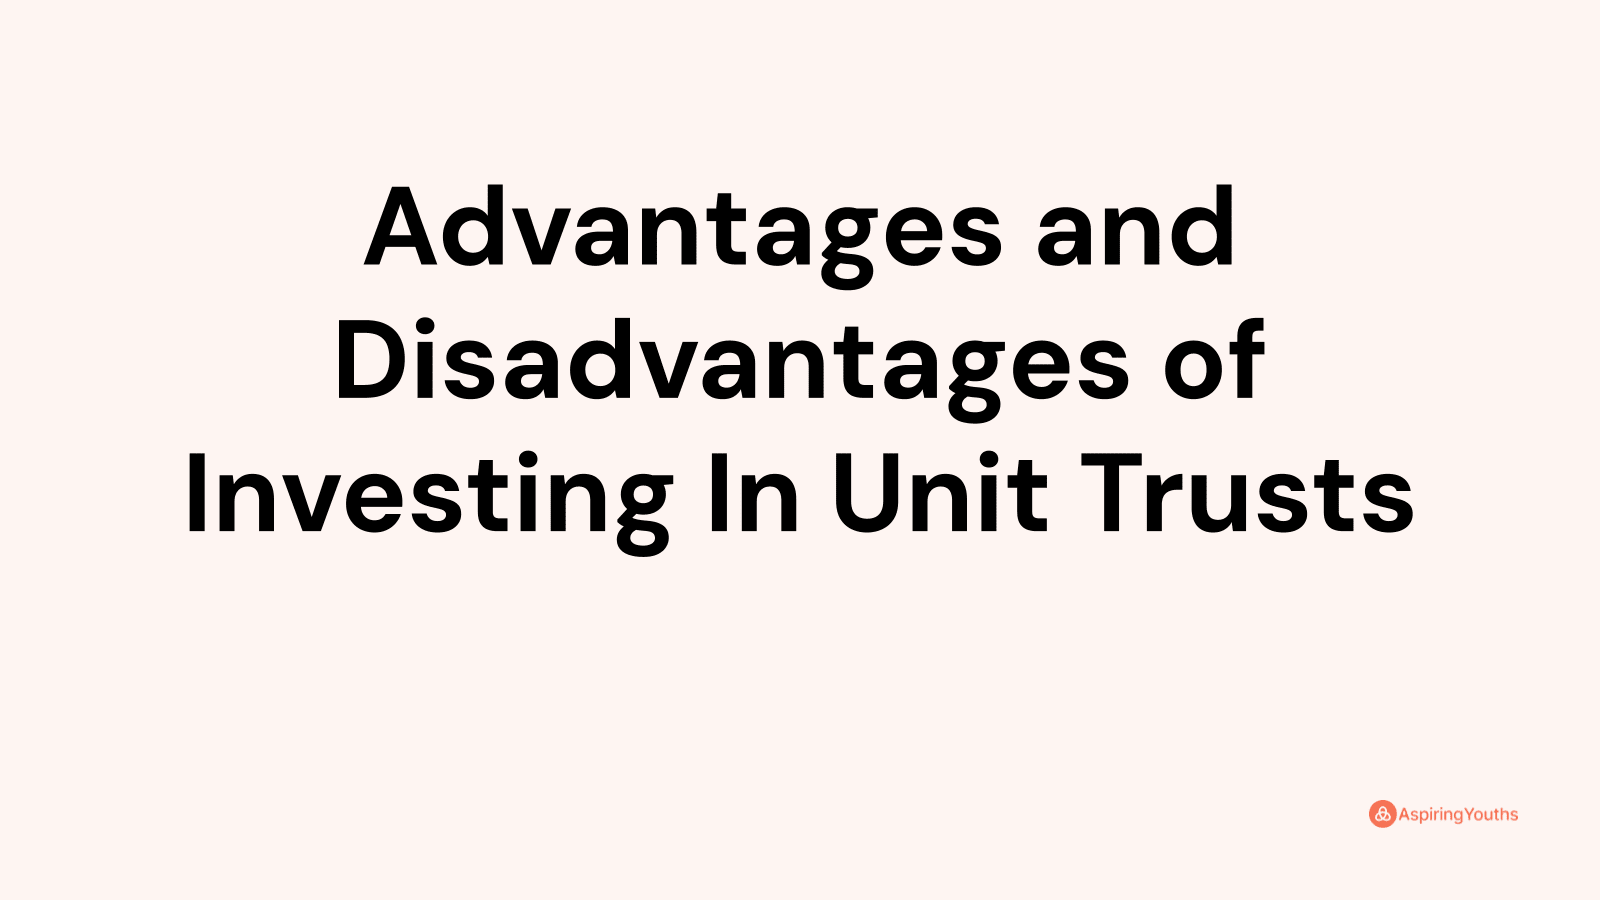 Advantages and disadvantages of Investing In Unit Trusts